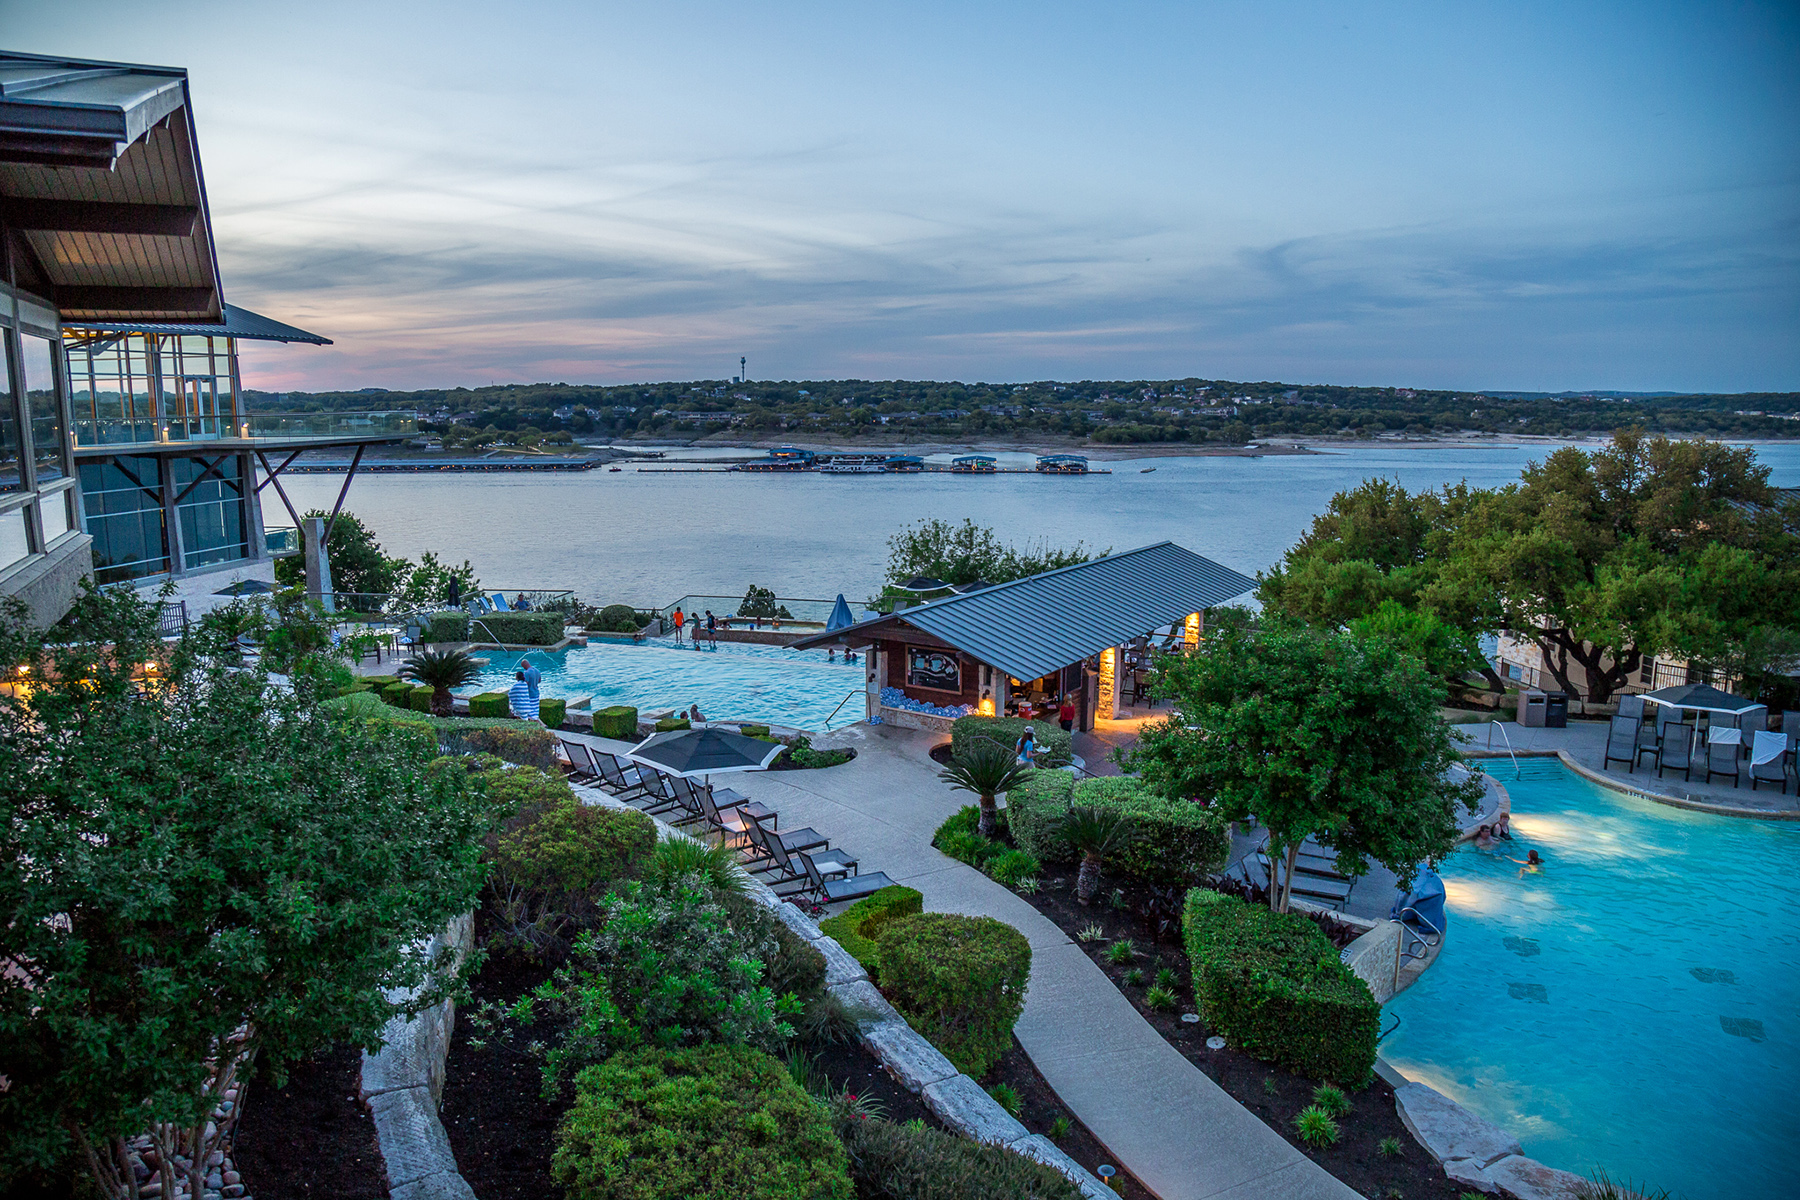 The Best of Lake Travis